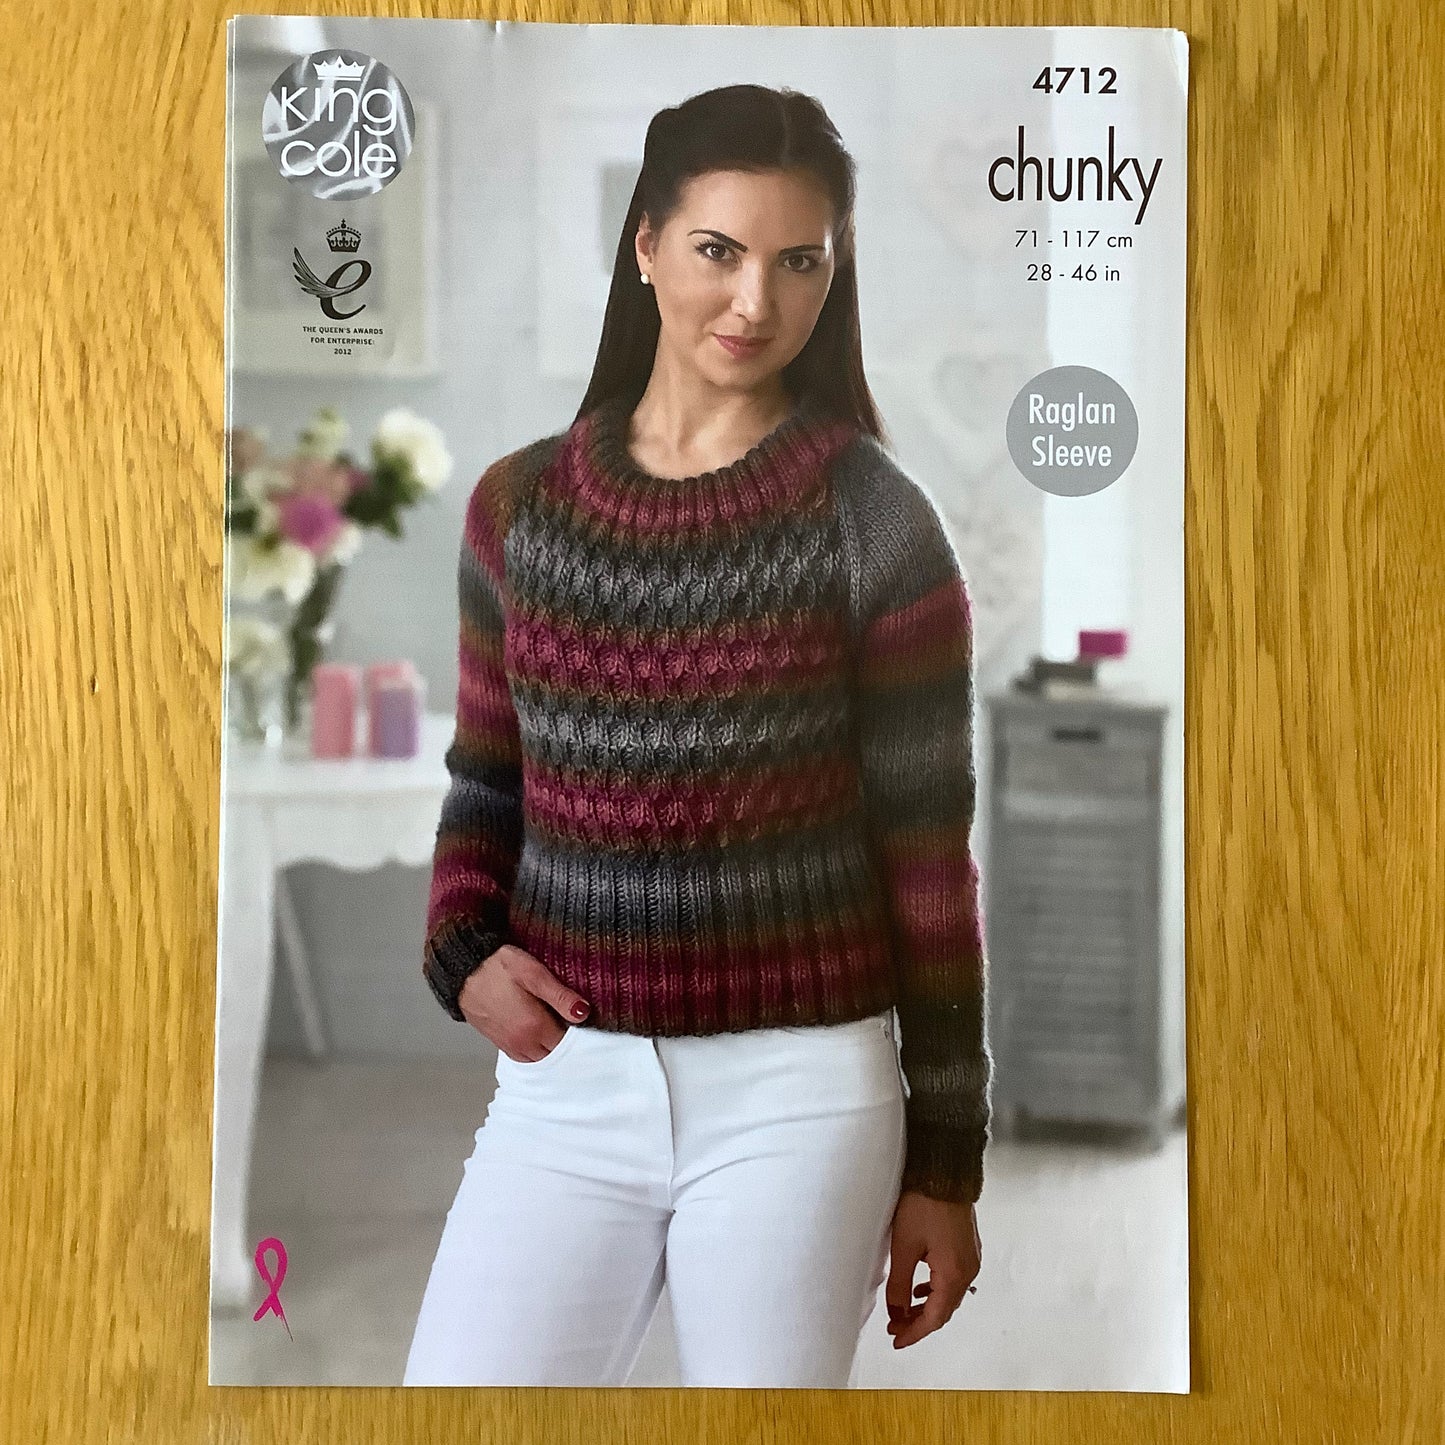 King Cole Ladies Riot Chunky Knitting Pattern 28" - 46" 4712